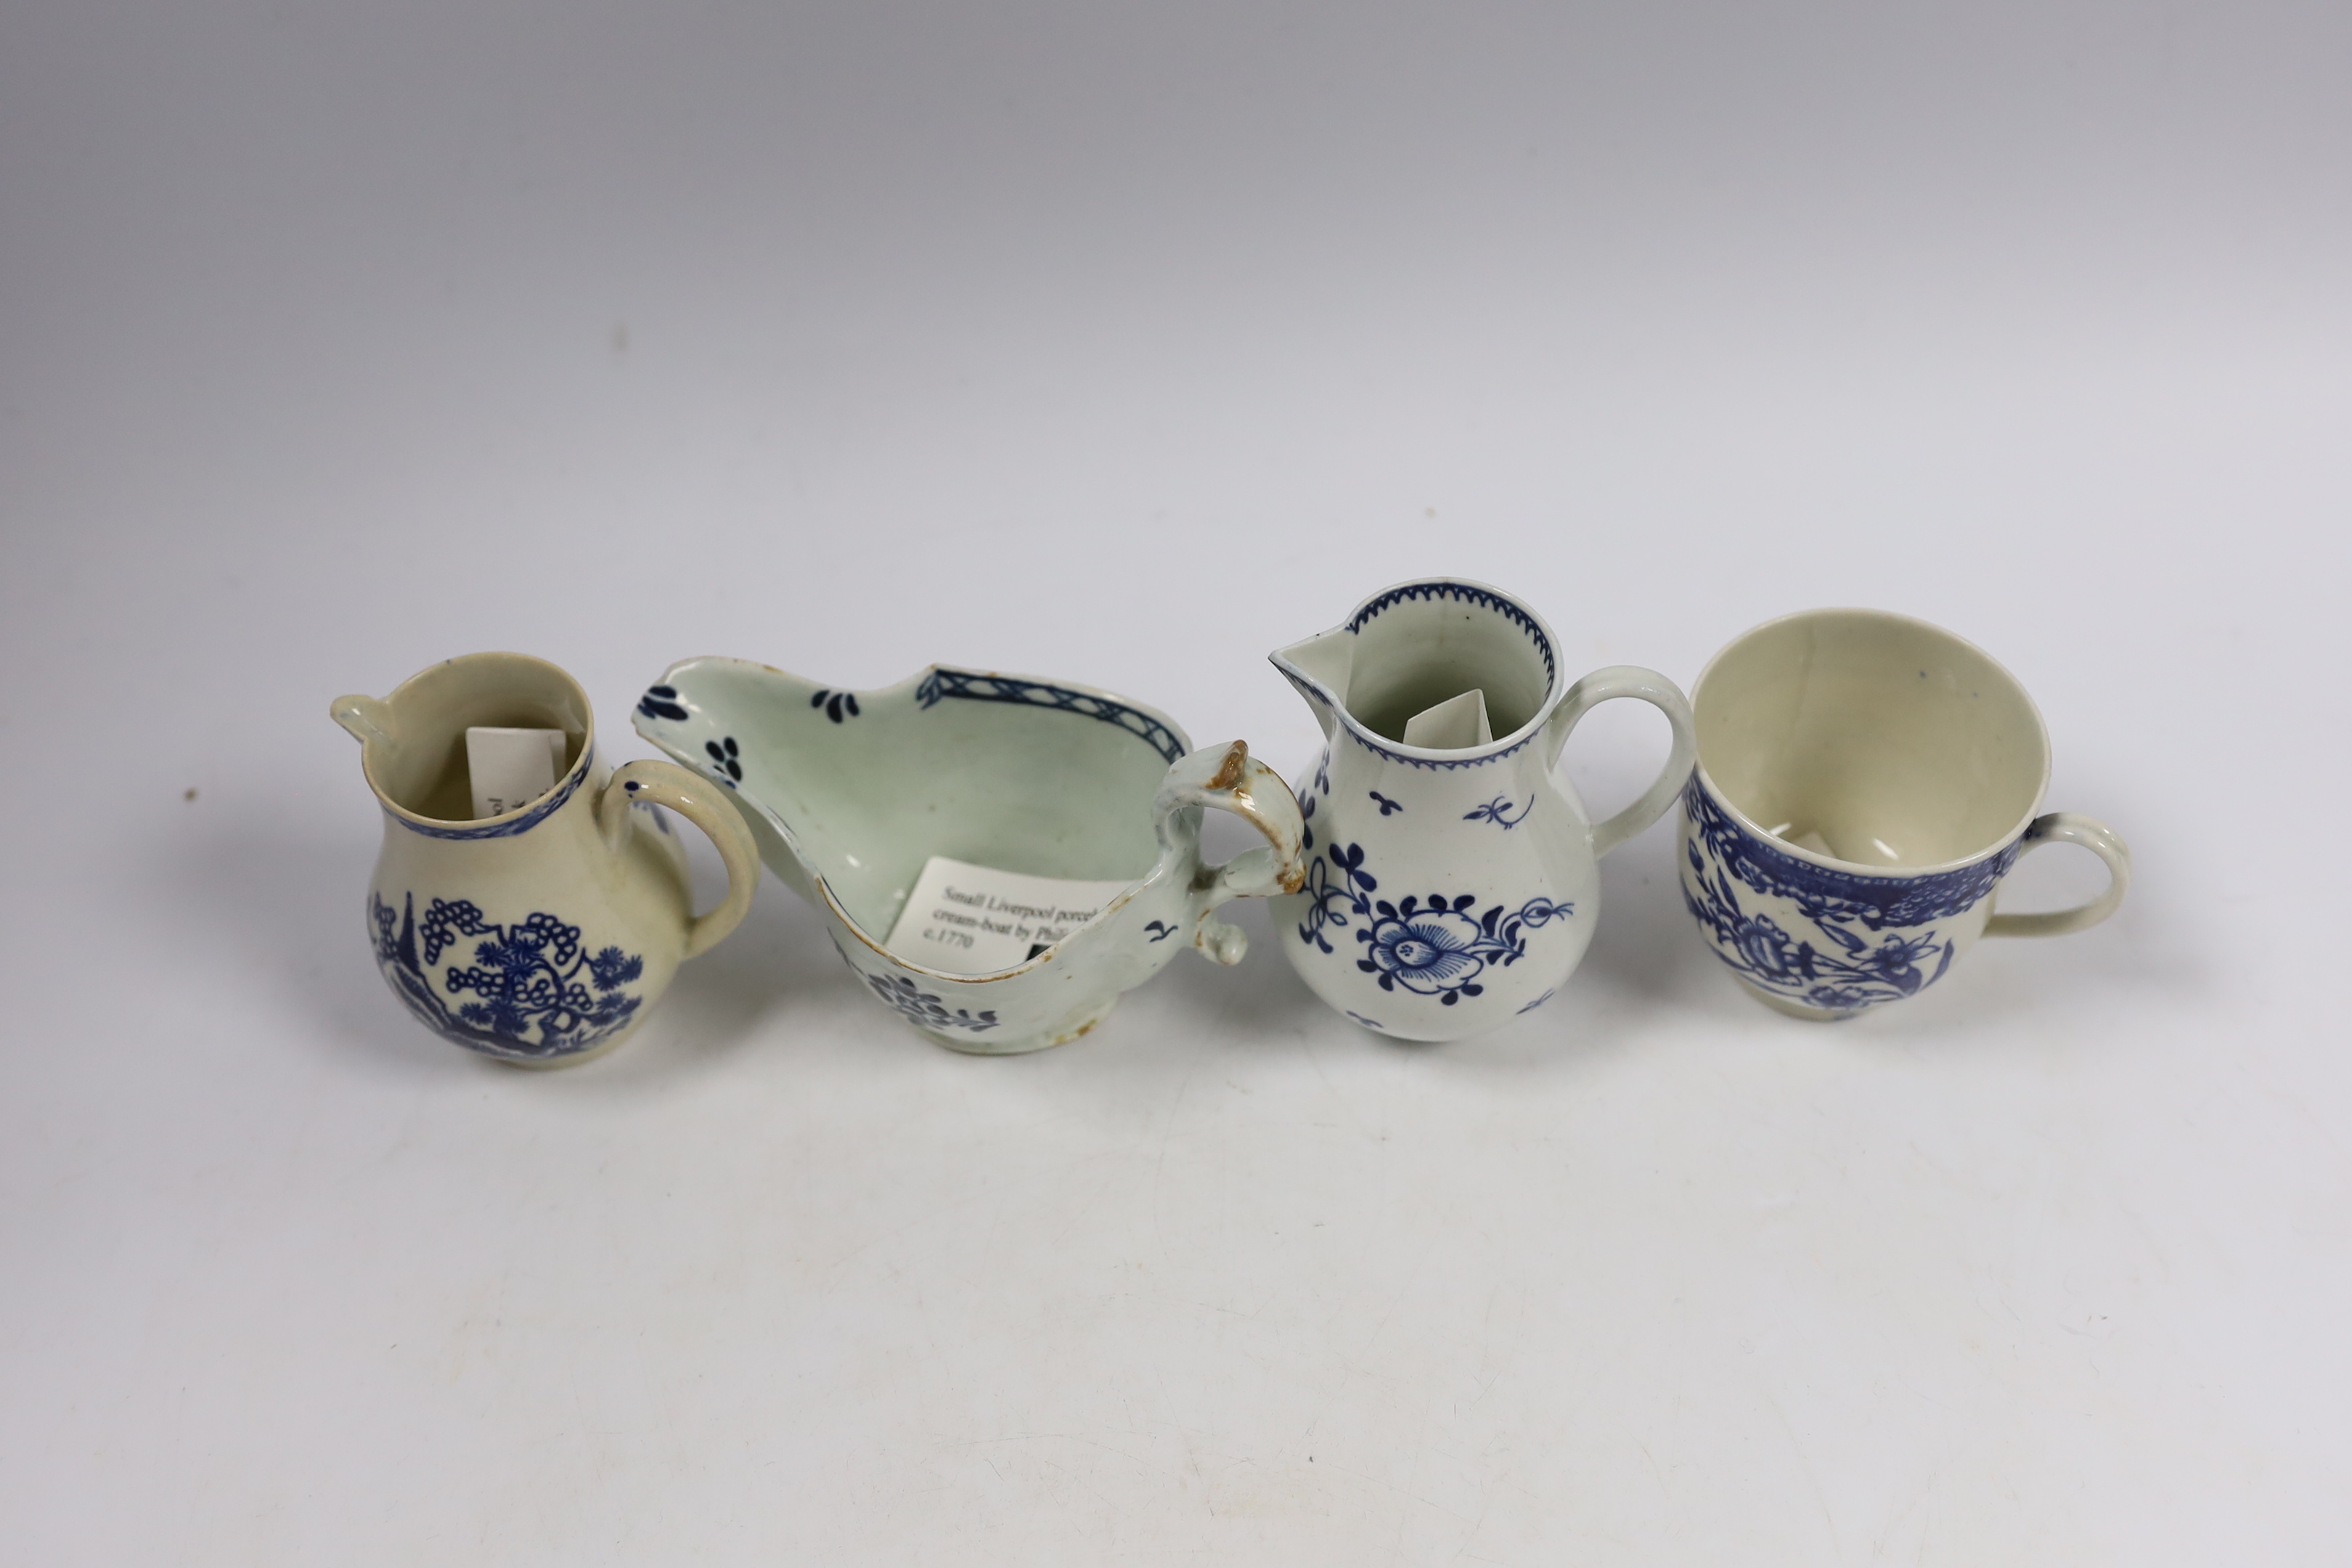 Christian or Pennington, Liverpool porcelain - a sauceboat, two milk jugs and a coffee cup, largest 13cm wide